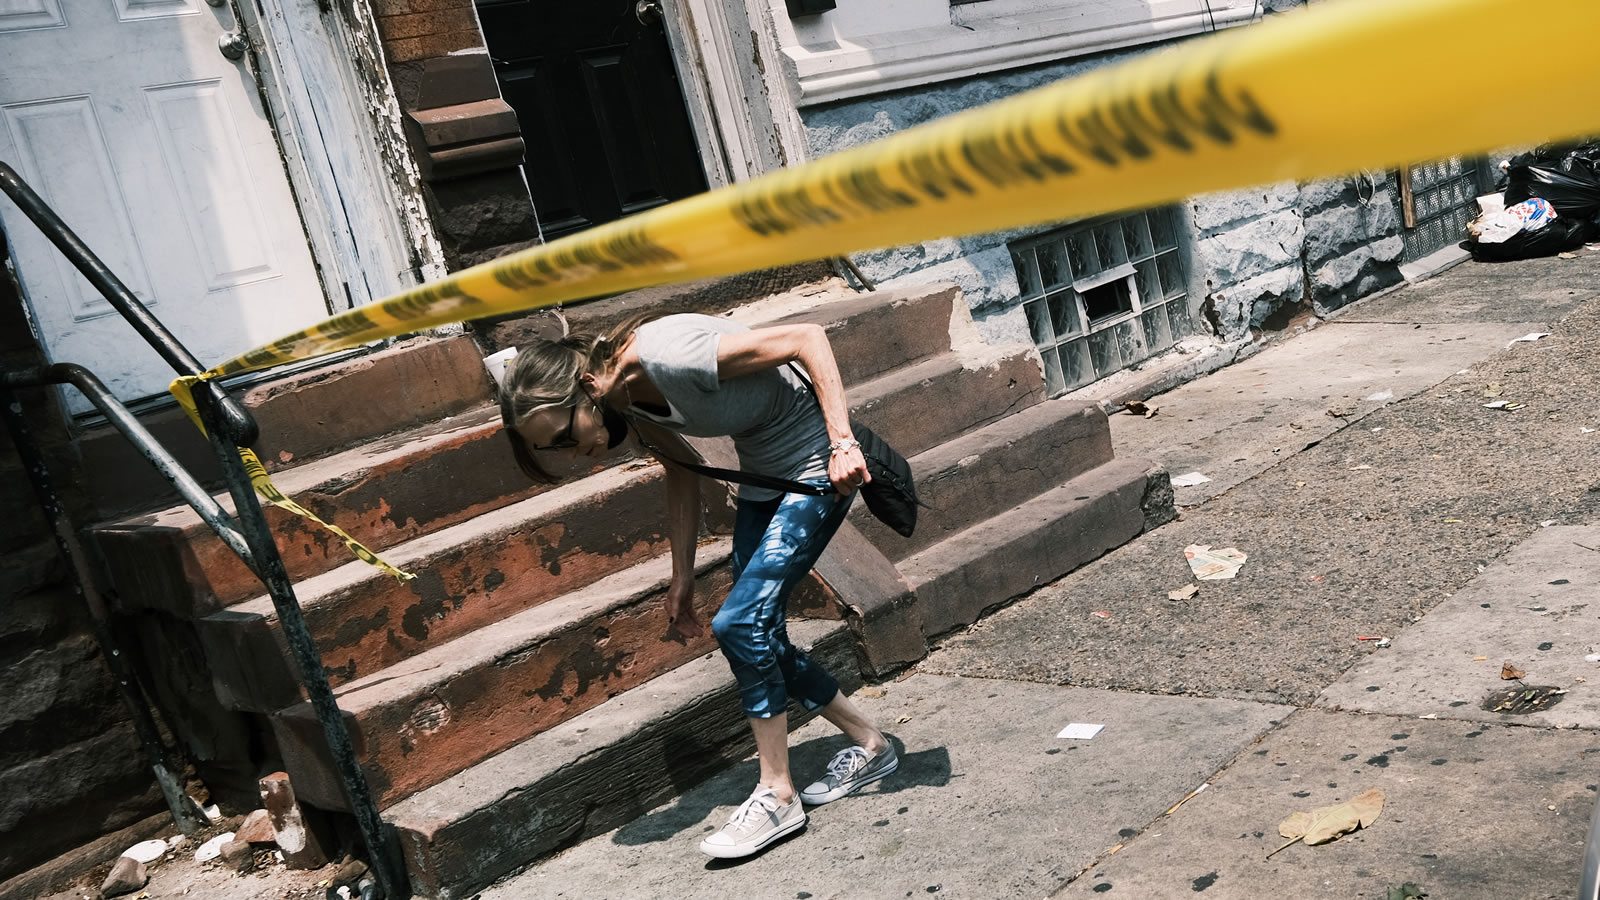 Philadelphia on Pace to Break Homicide Record as Gun Violence Spirals Out of Control